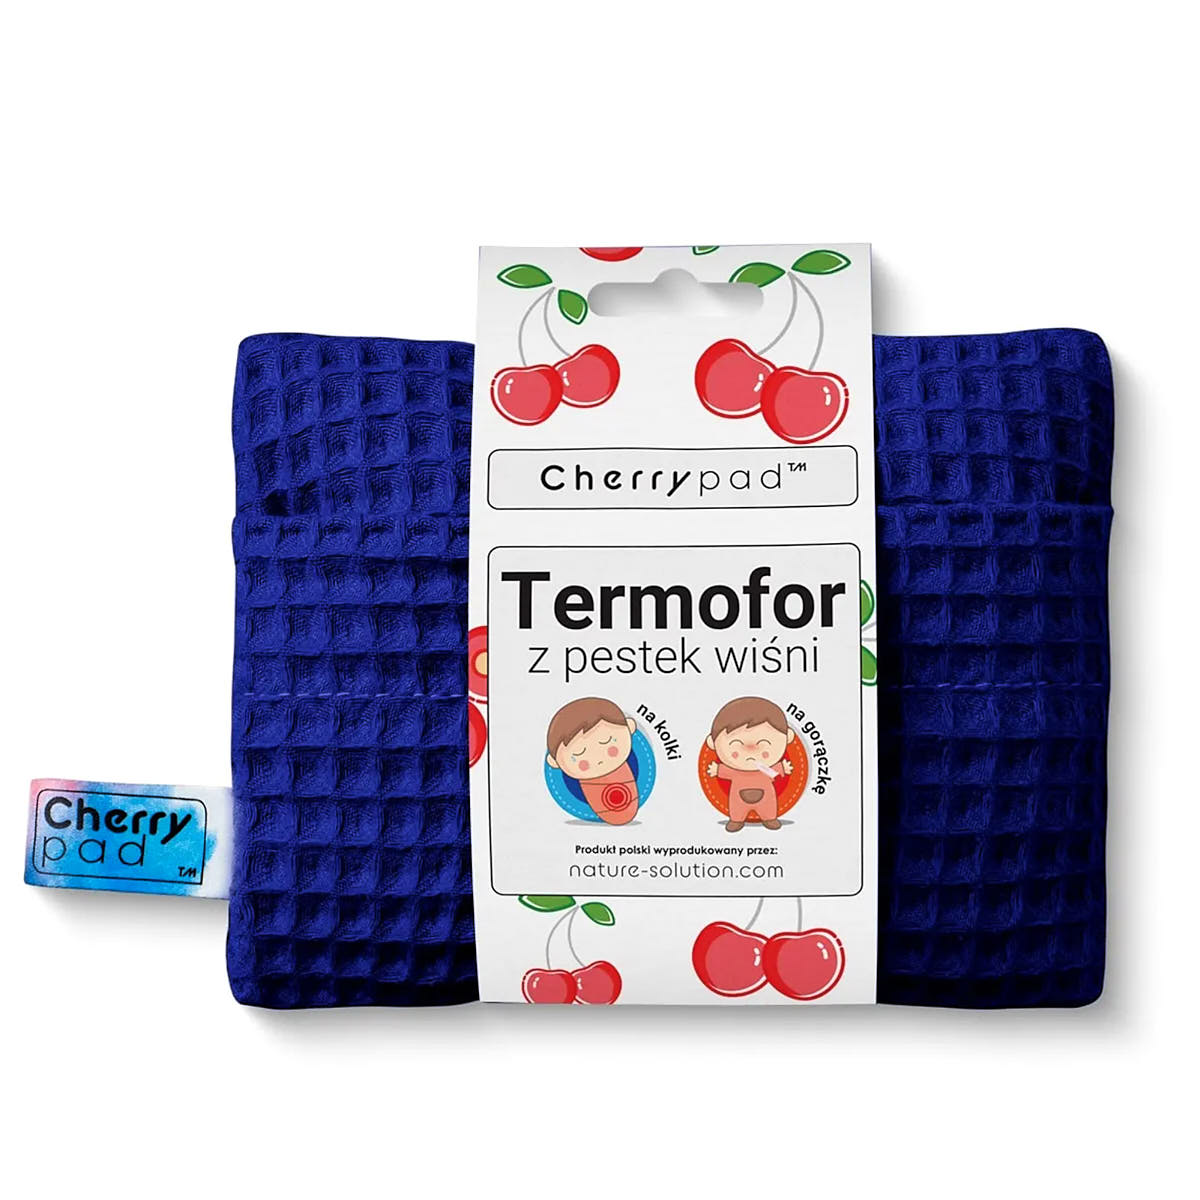 Termofor Cherrypad – Wafel - Nature-solution granatowy